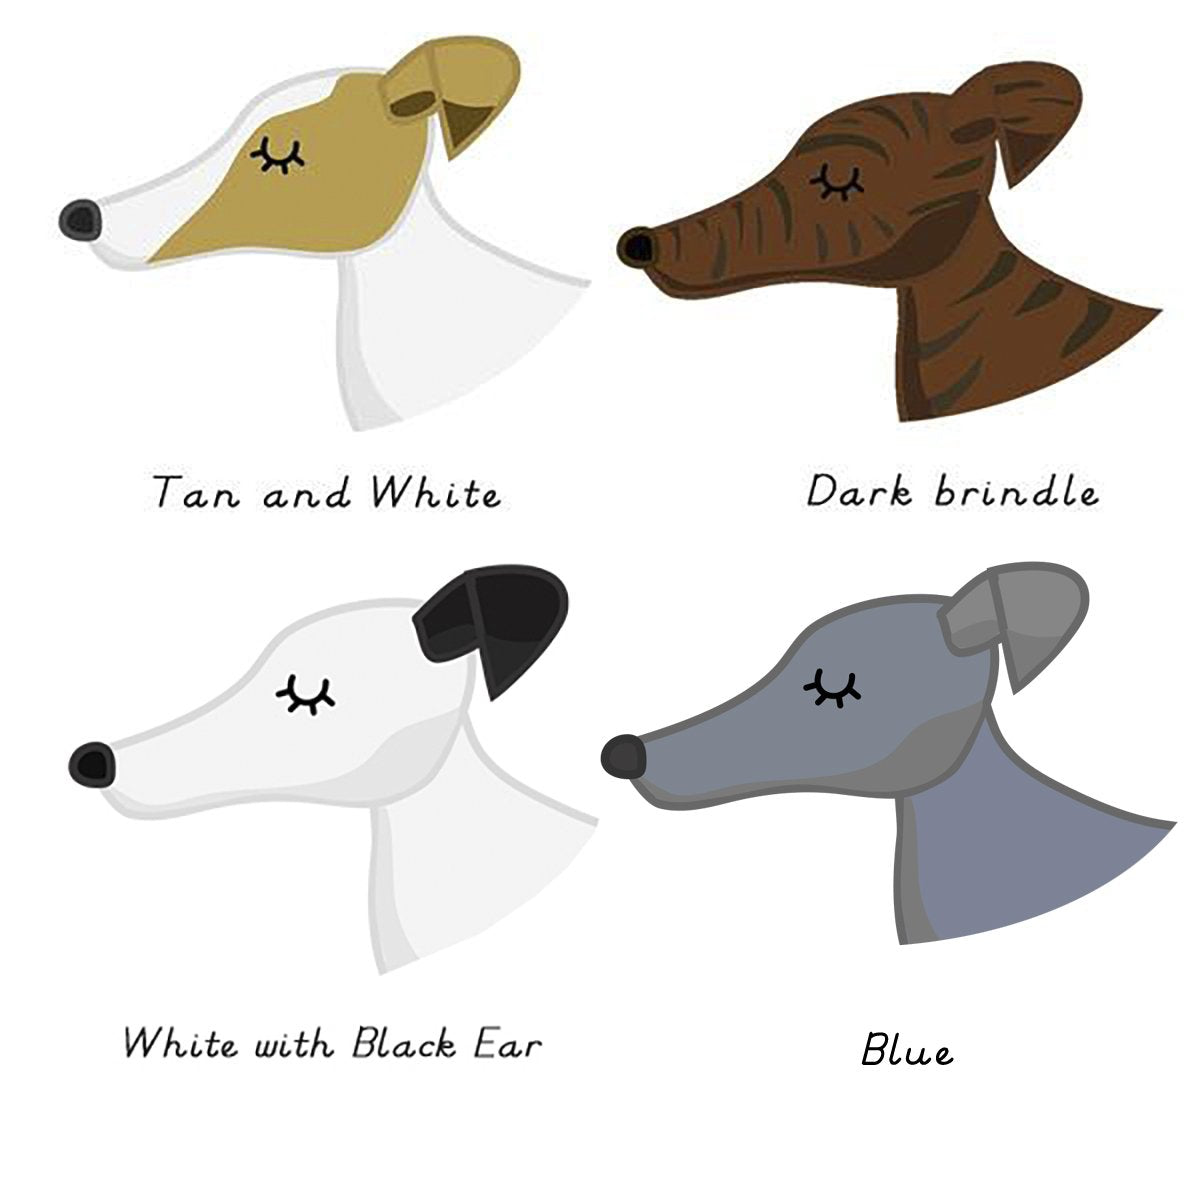 Greyhound/ Whippet Personalised Ceramic Dog Bowl  - Hoobynoo - Personalised Pet Tags and Gifts